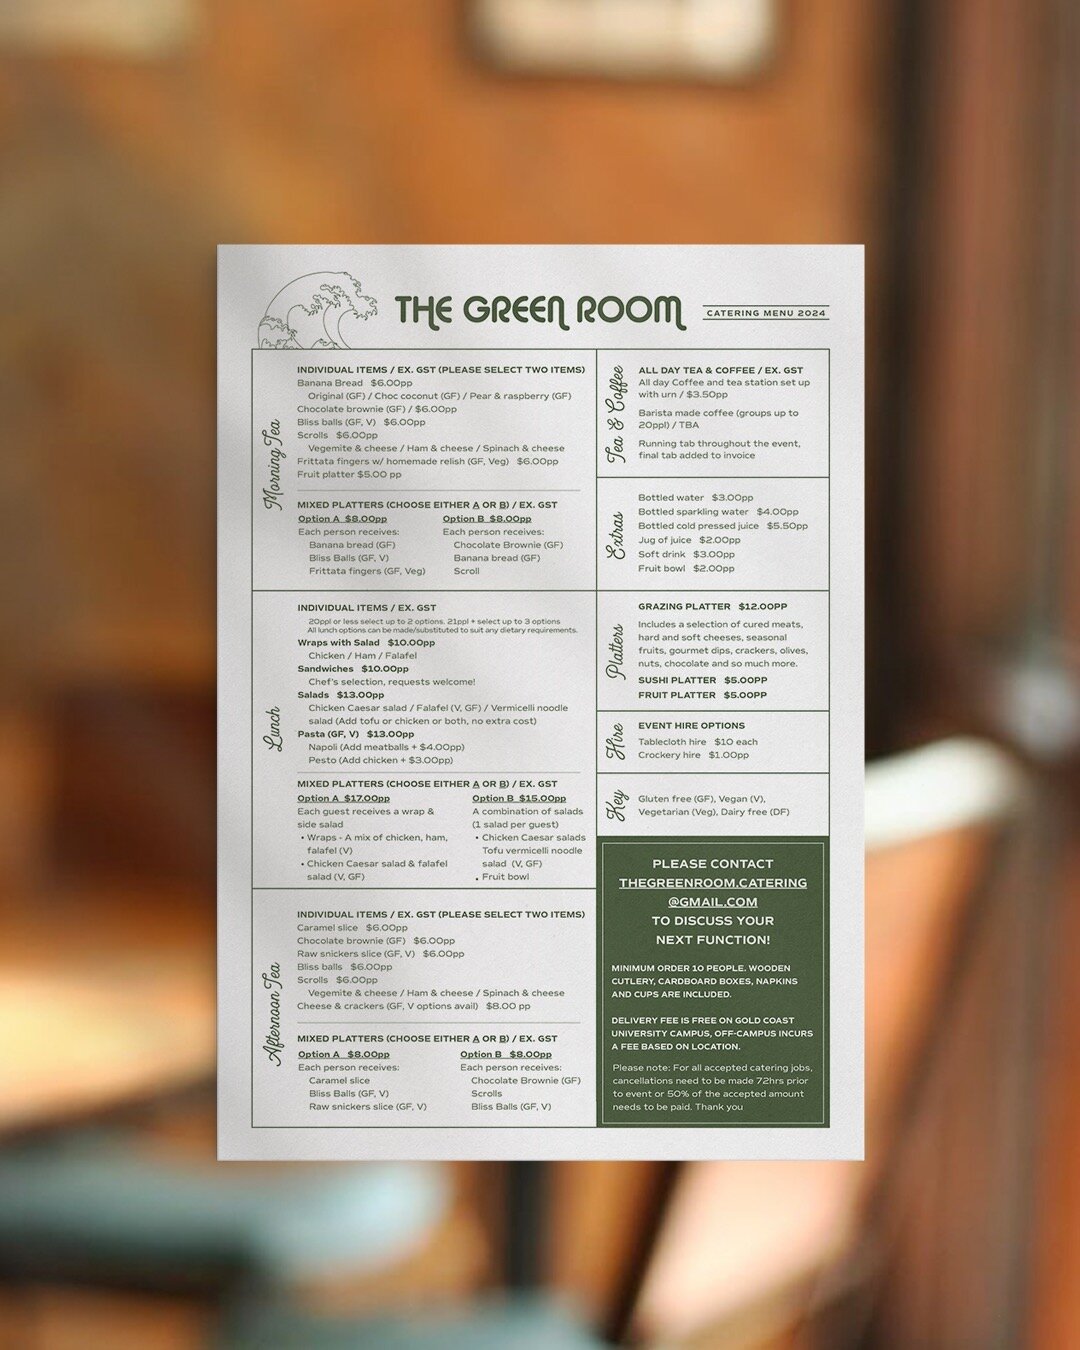 &ldquo;The order form and new menu has been unreal! I can&rsquo;t thank you enough&rdquo; 

Problem: Our customers can't access our menu easily to order their event catering and the back and forth with emails trying to sort it out takes up so much of